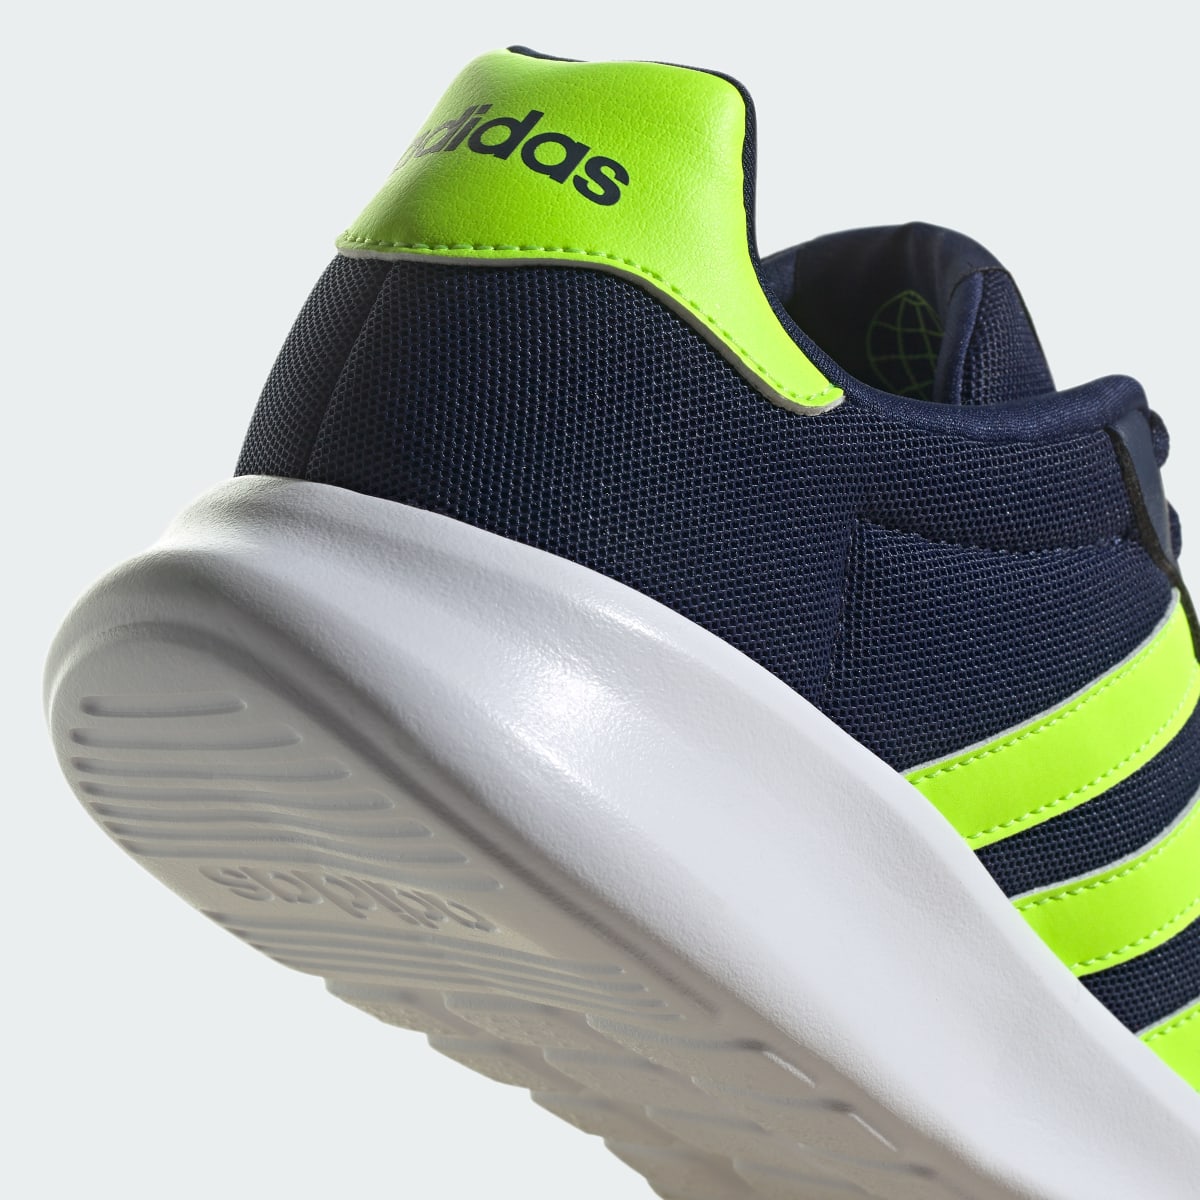 Adidas Lite Racer 3.0 Shoes. 9